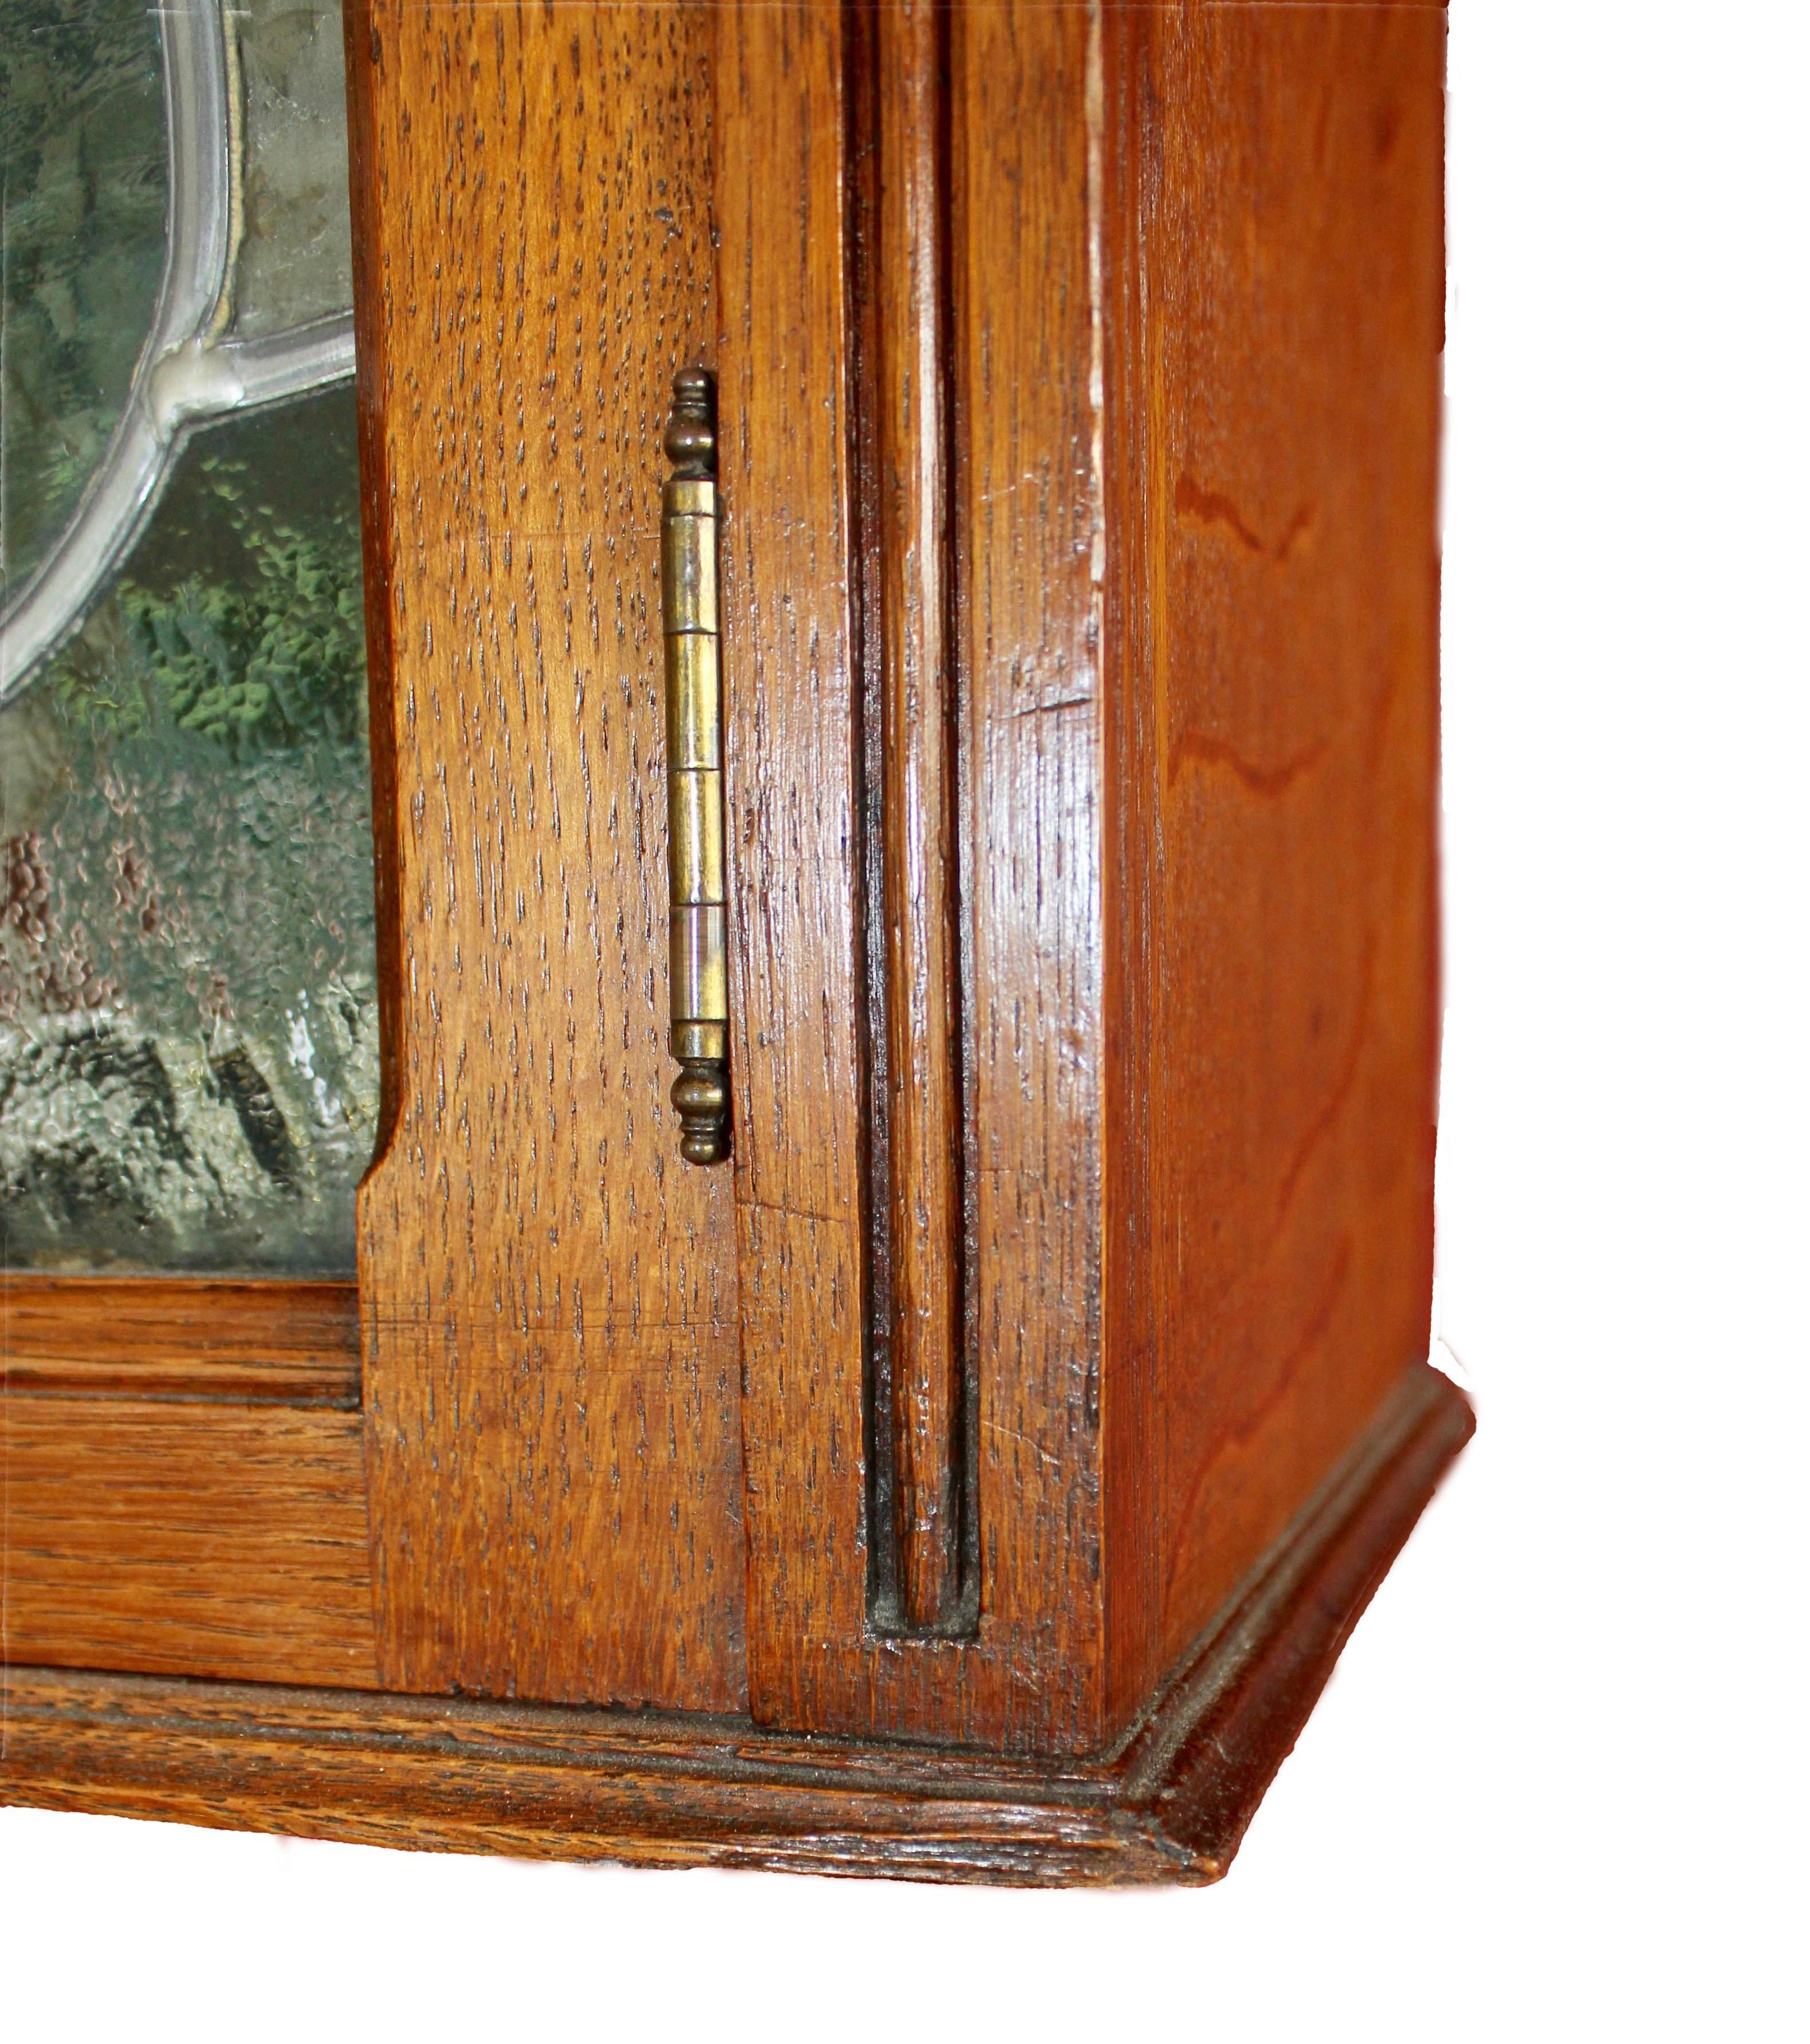 Early 20th Century French Art Nouveau Display Case Cabinet with Colored Stained Glass